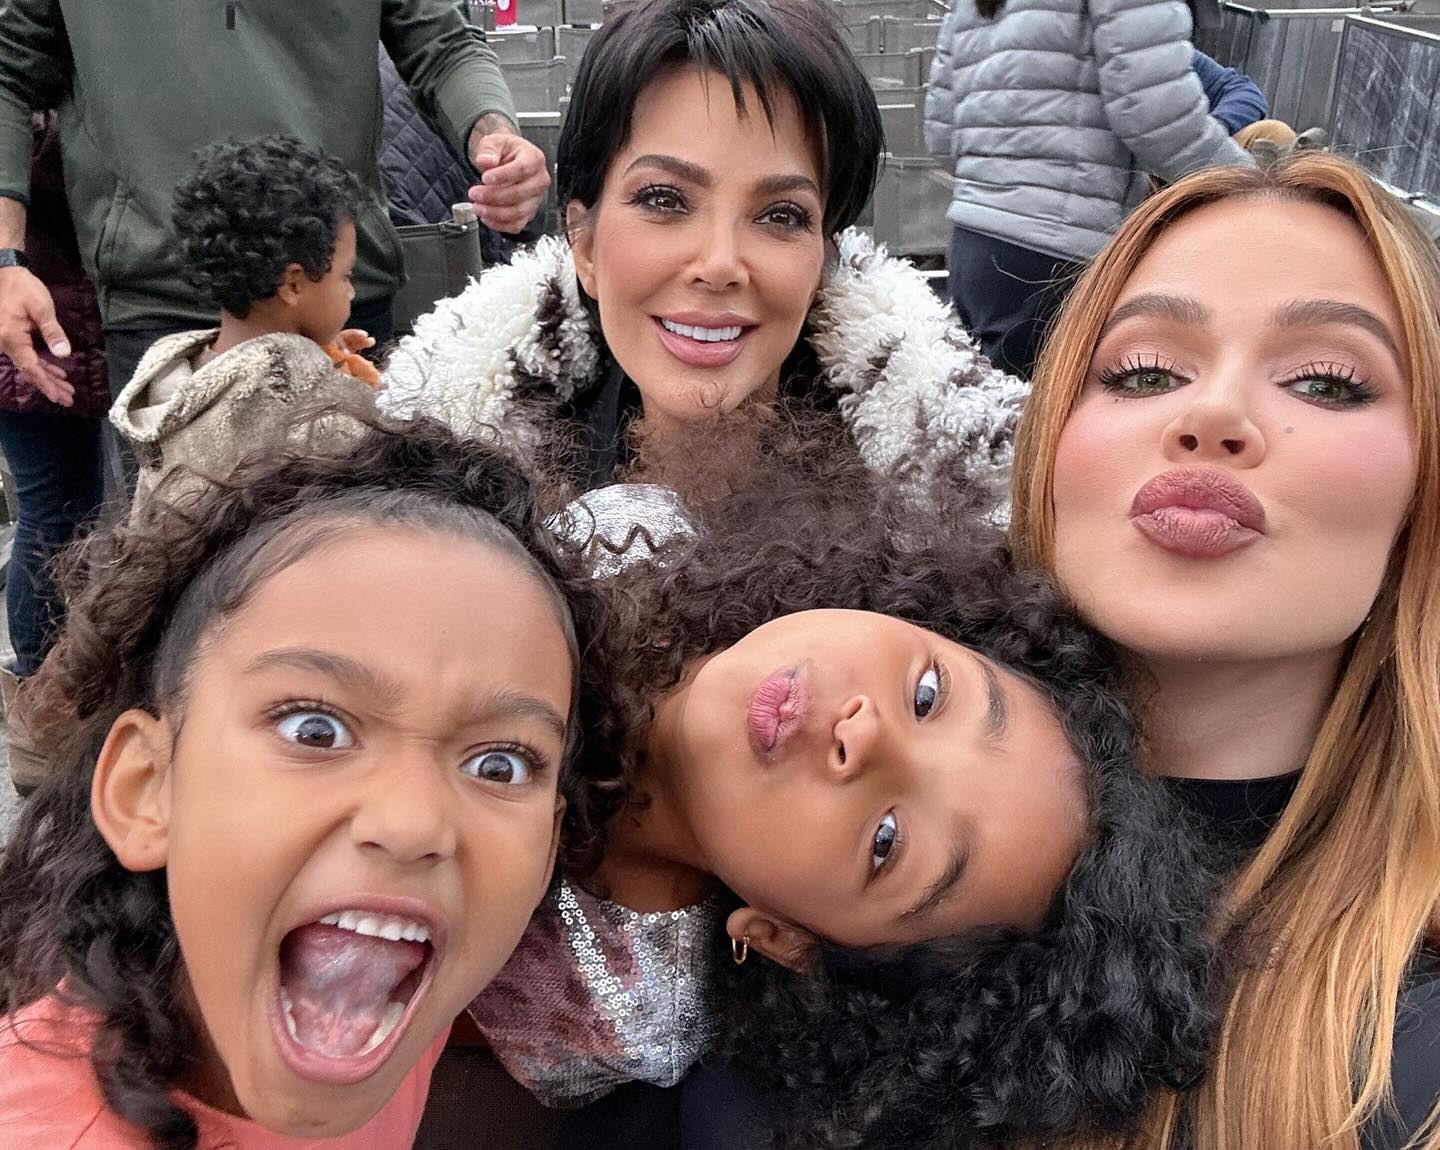 Kris was recently seen sporting her blinding white teeth in a selfie with her daughter and two of her grandkids last week